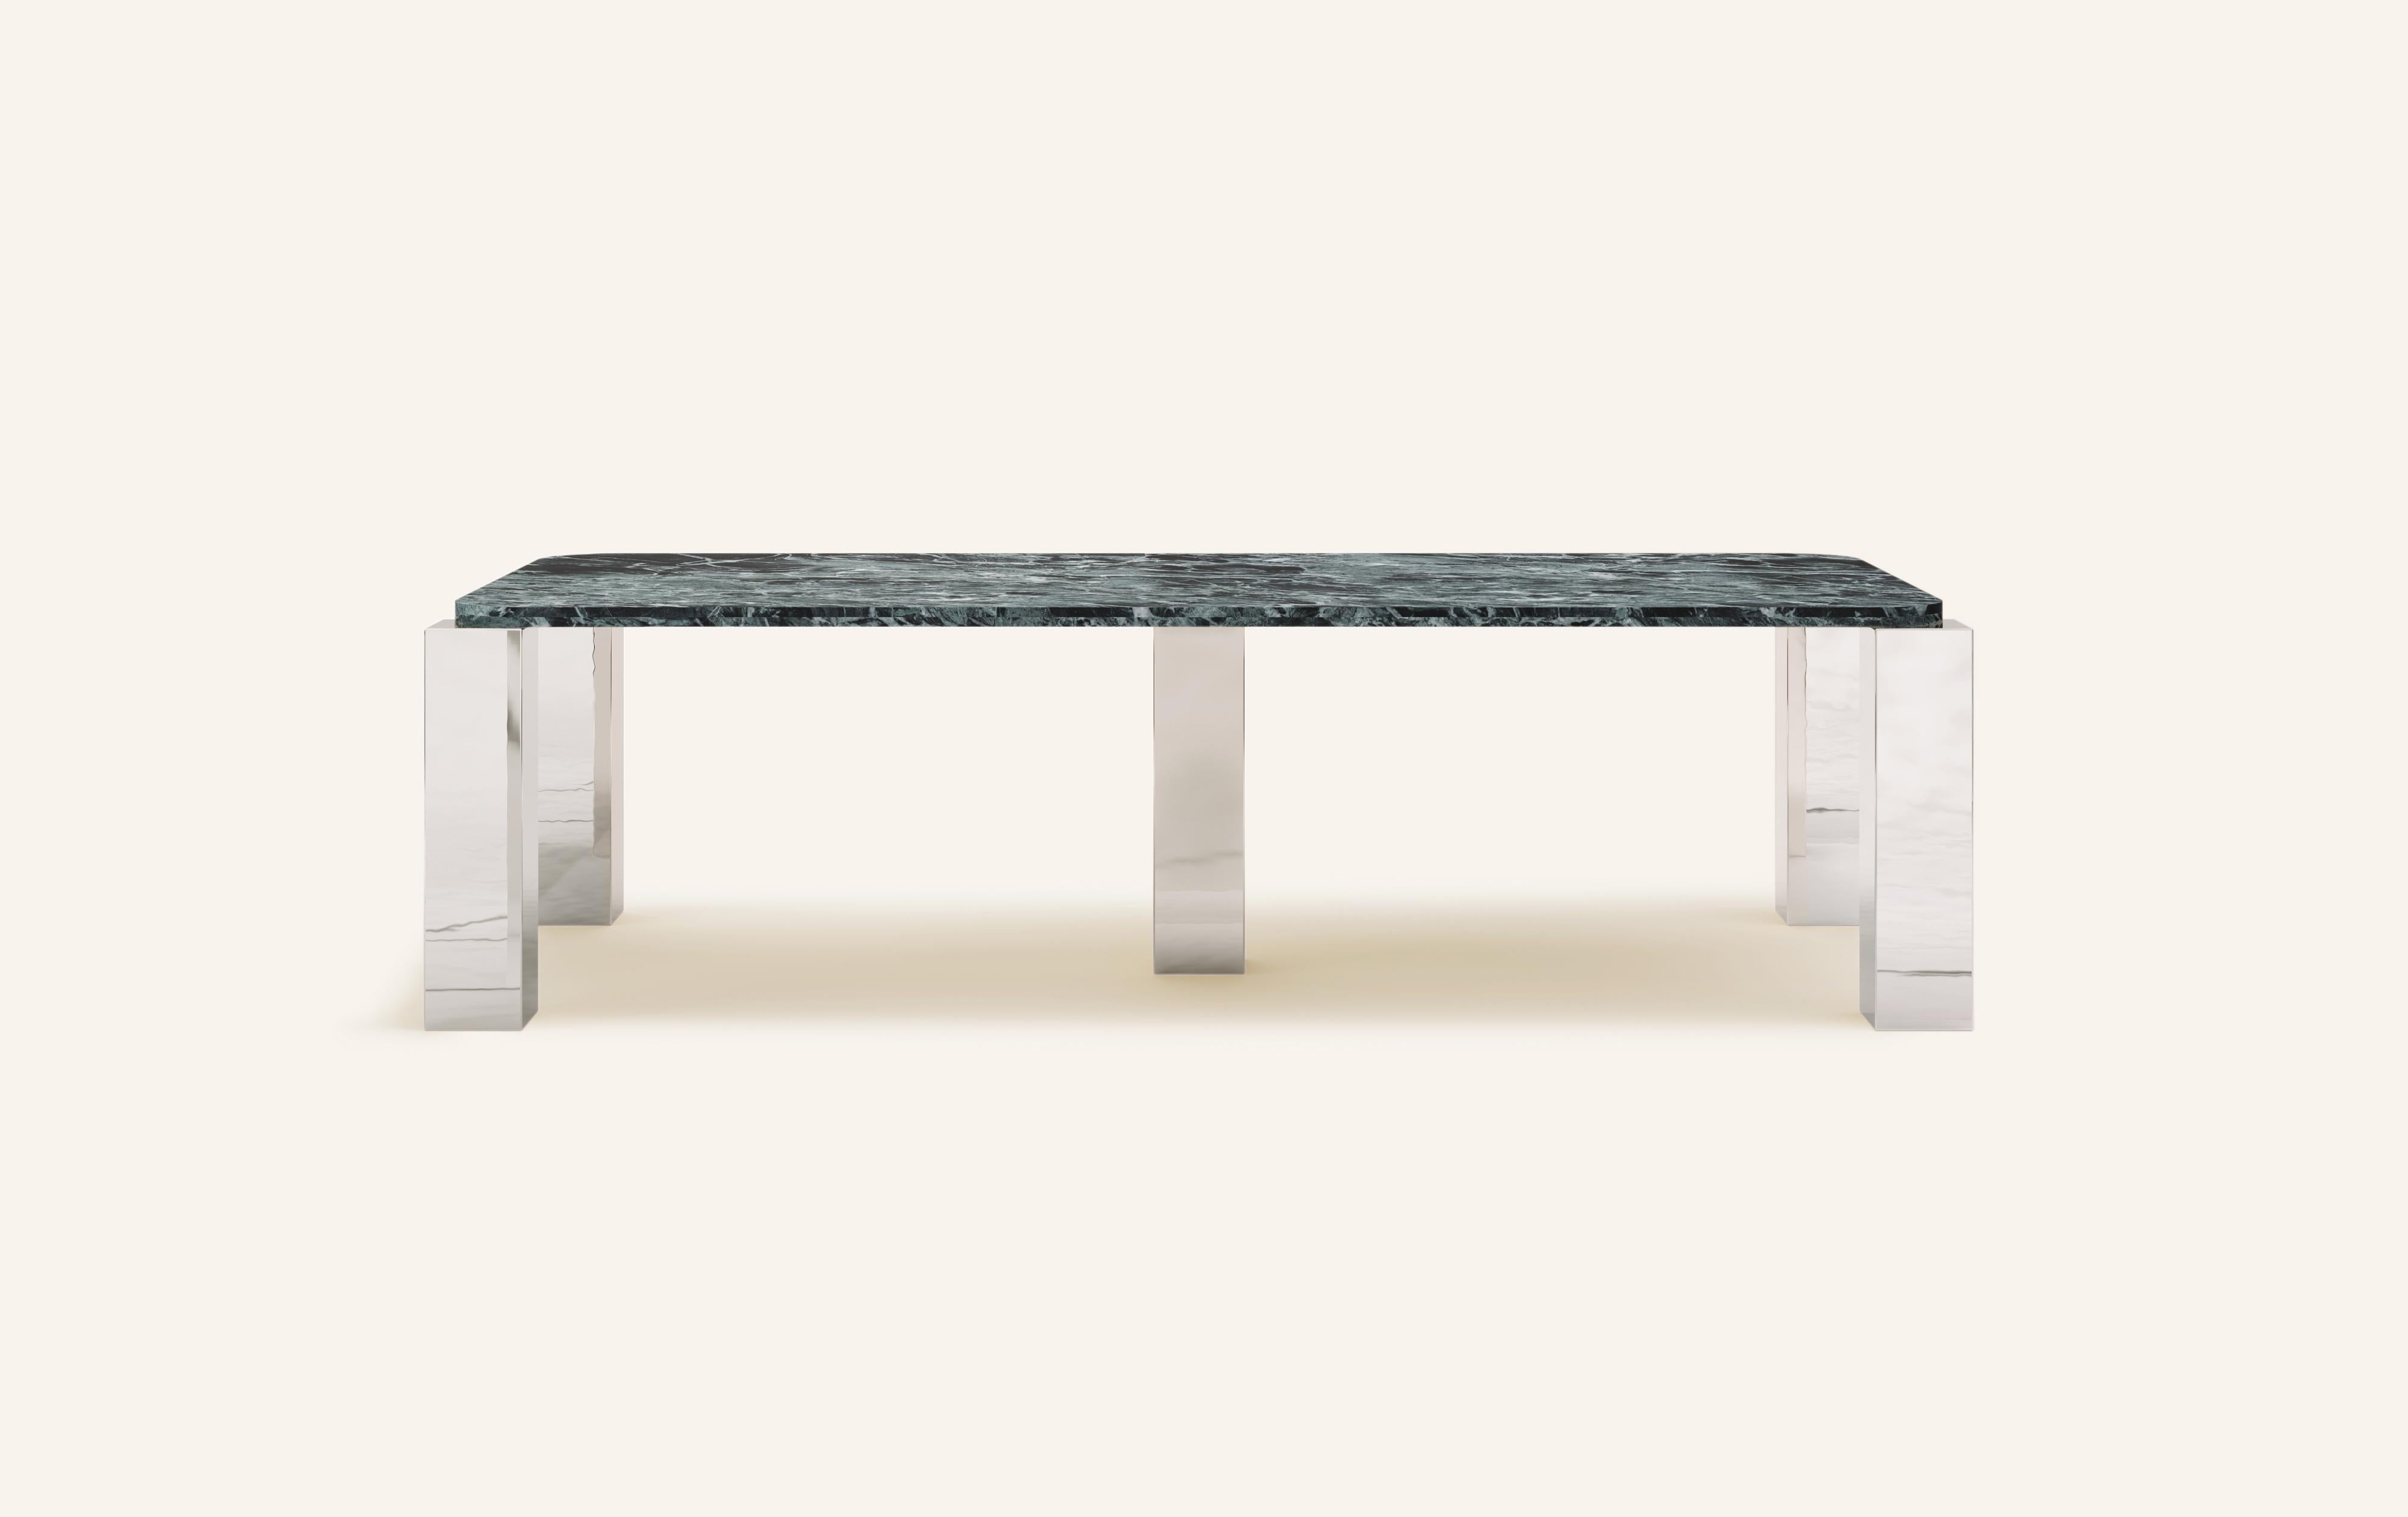 MONOLITHIC FORMS SOFTENED BY GENTLE EDGES. WITH ITS BOLD MARBLE PATTERNS CUBO IS AS VERSATILE AS IT IS STRIKING.

DIMENSIONS:
98”L x 44”W x 30”H: 
- 96”L x 42”W x 1.5” THICK TABLETOP WITH WITH 6